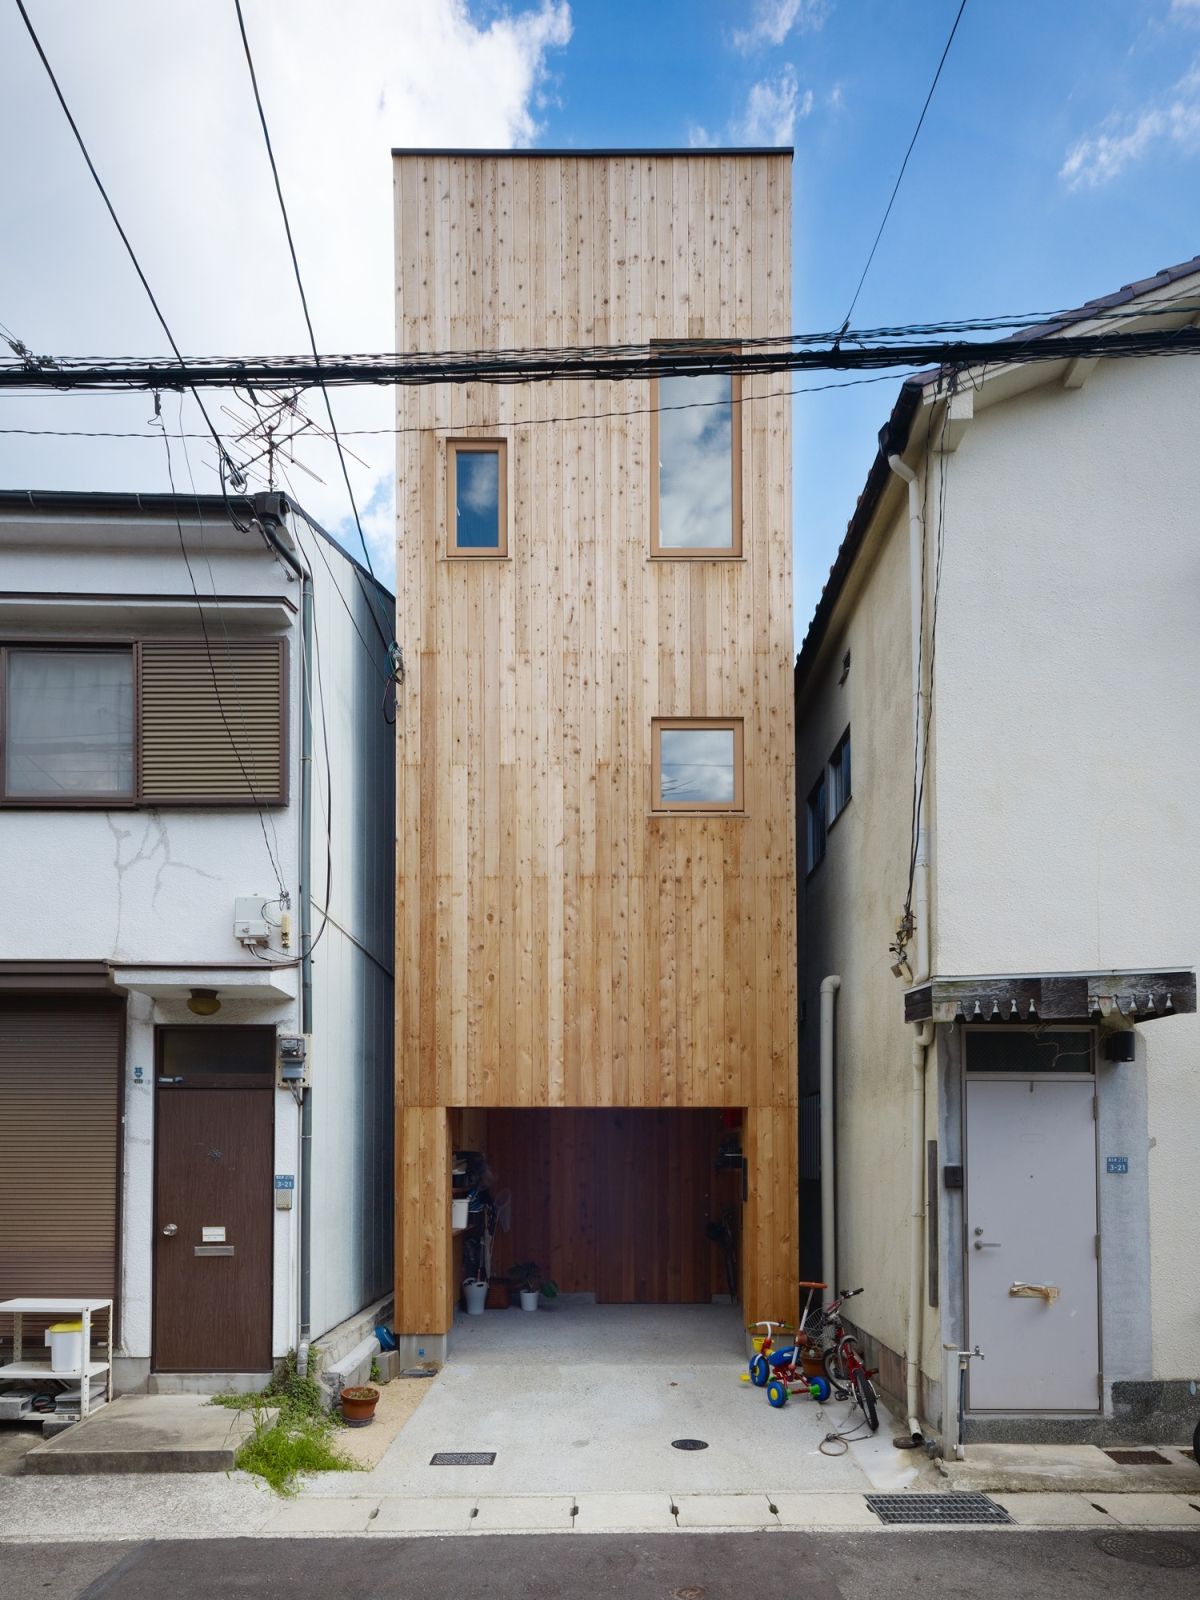 This narrow house in Nada